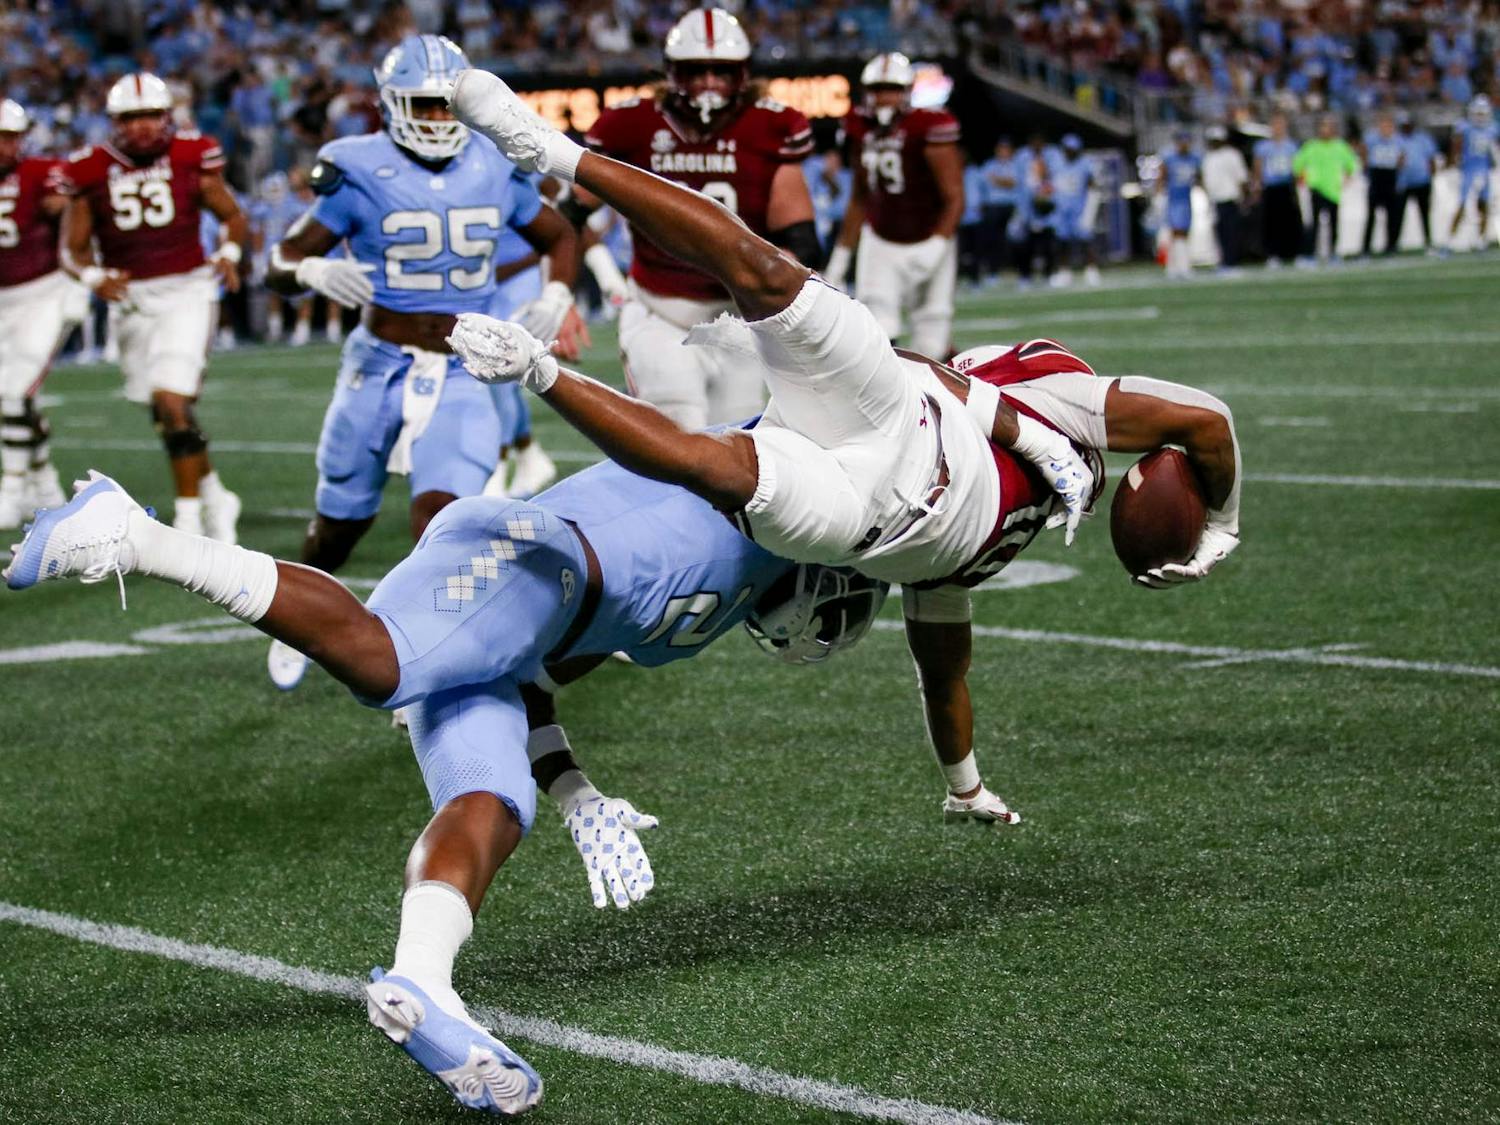 The University of North Carolina and the University of South Carolina met at the Bank of America Stadium in Charlotte, North Carolina, for the 2023 season's opening game. The Tar Heels defeated the Gamecocks 31-17 and now lead the series between the two teams 36-20-4. Redshirt senior quarterback Spencer Rattler was 30-39 with 353 yards in the season opener.